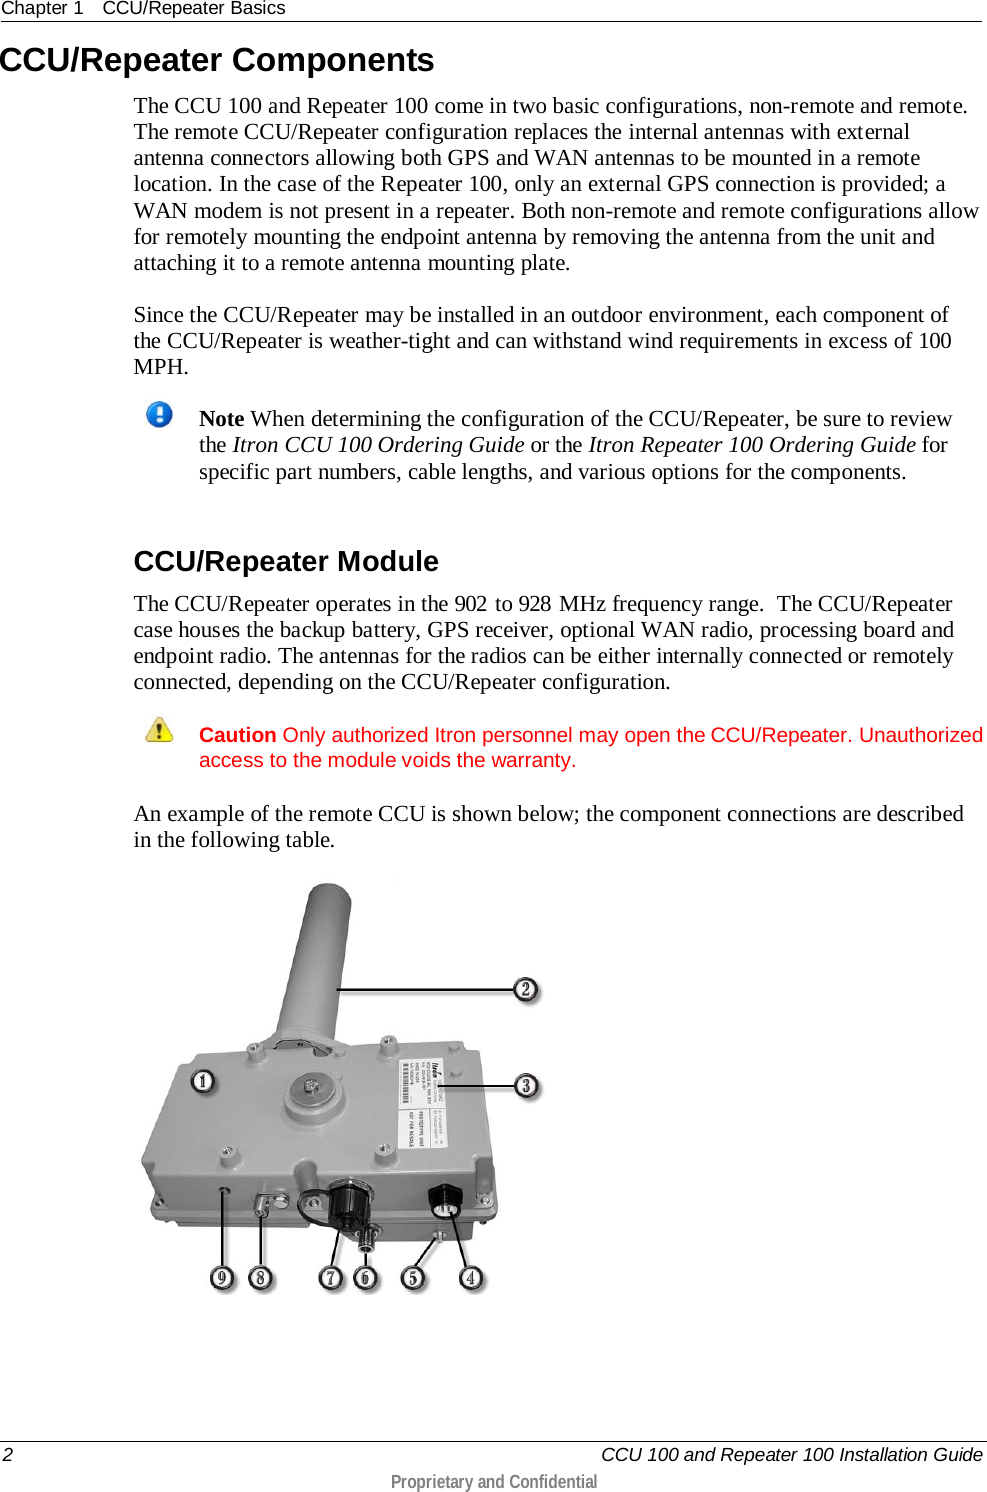 Chapter 1 CCU/Repeater Basics  2   CCU 100 and Repeater 100 Installation Guide  Proprietary and Confidential  CCU/Repeater Components The CCU 100 and Repeater 100 come in two basic configurations, non-remote and remote. The remote CCU/Repeater configuration replaces the internal antennas with external antenna connectors allowing both GPS and WAN antennas to be mounted in a remote location. In the case of the Repeater 100, only an external GPS connection is provided; a WAN modem is not present in a repeater. Both non-remote and remote configurations allow for remotely mounting the endpoint antenna by removing the antenna from the unit and attaching it to a remote antenna mounting plate. Since the CCU/Repeater may be installed in an outdoor environment, each component of the CCU/Repeater is weather-tight and can withstand wind requirements in excess of 100 MPH.   Note When determining the configuration of the CCU/Repeater, be sure to review the Itron CCU 100 Ordering Guide or the Itron Repeater 100 Ordering Guide for specific part numbers, cable lengths, and various options for the components.    CCU/Repeater Module The CCU/Repeater operates in the 902 to 928 MHz frequency range.  The CCU/Repeater case houses the backup battery, GPS receiver, optional WAN radio, processing board and endpoint radio. The antennas for the radios can be either internally connected or remotely connected, depending on the CCU/Repeater configuration.  Caution Only authorized Itron personnel may open the CCU/Repeater. Unauthorized access to the module voids the warranty.  An example of the remote CCU is shown below; the component connections are described in the following table.   